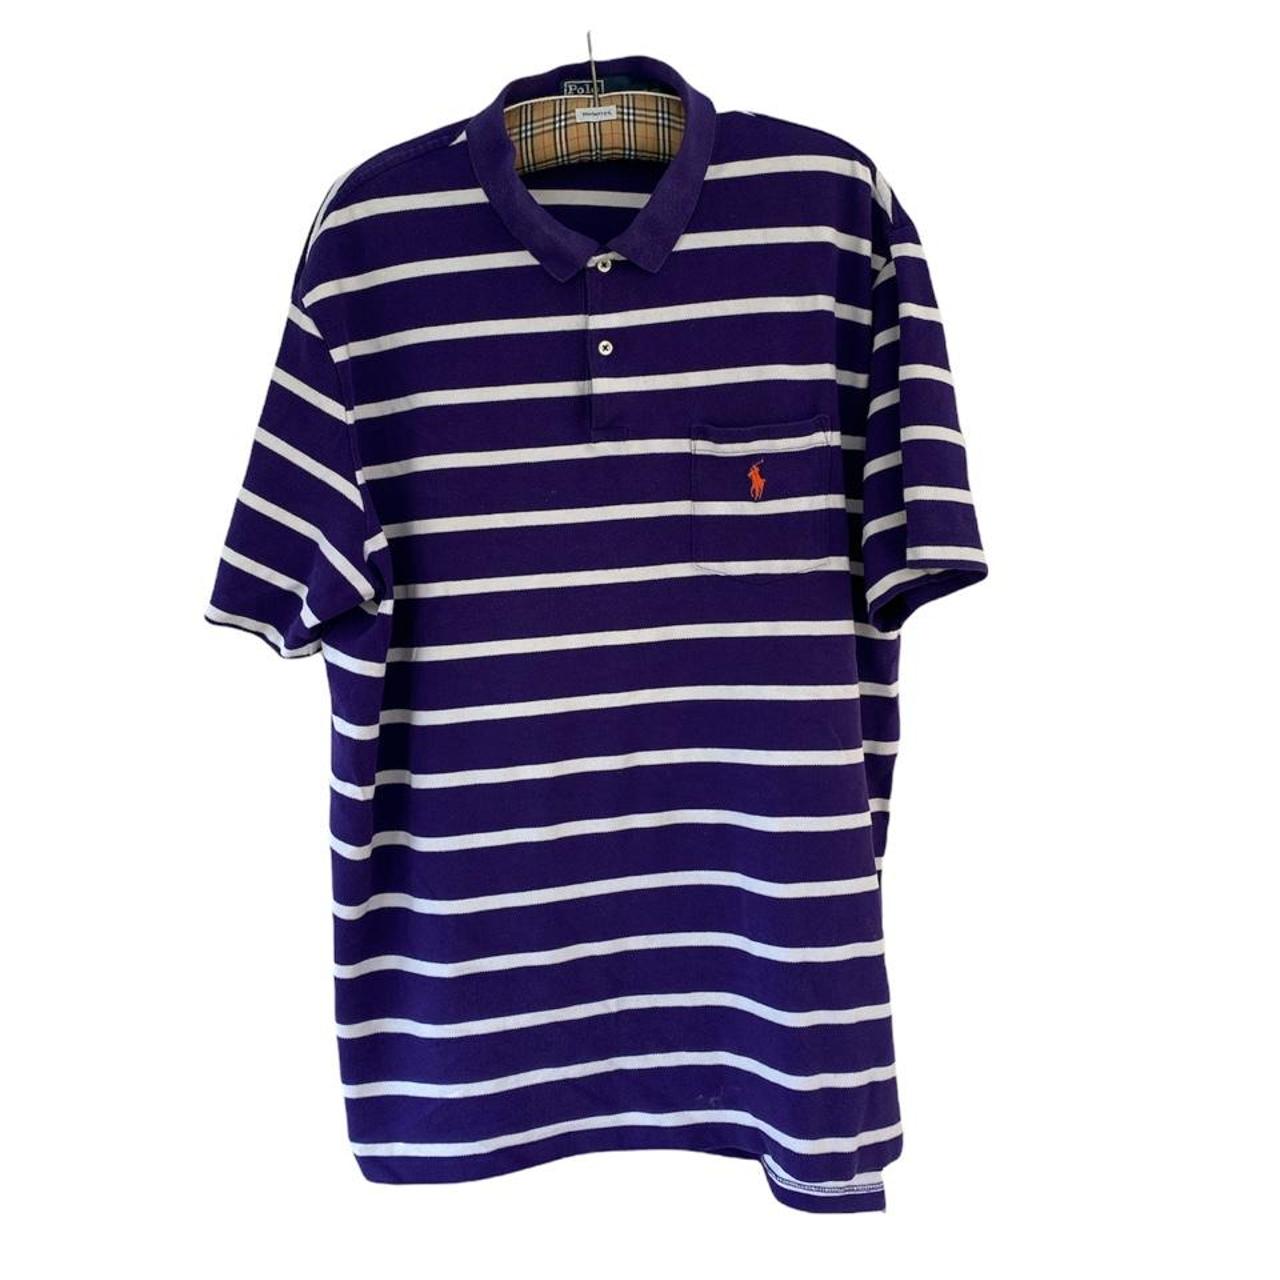 Vintage Ralph Lauren striped polo in a purple and... - Depop